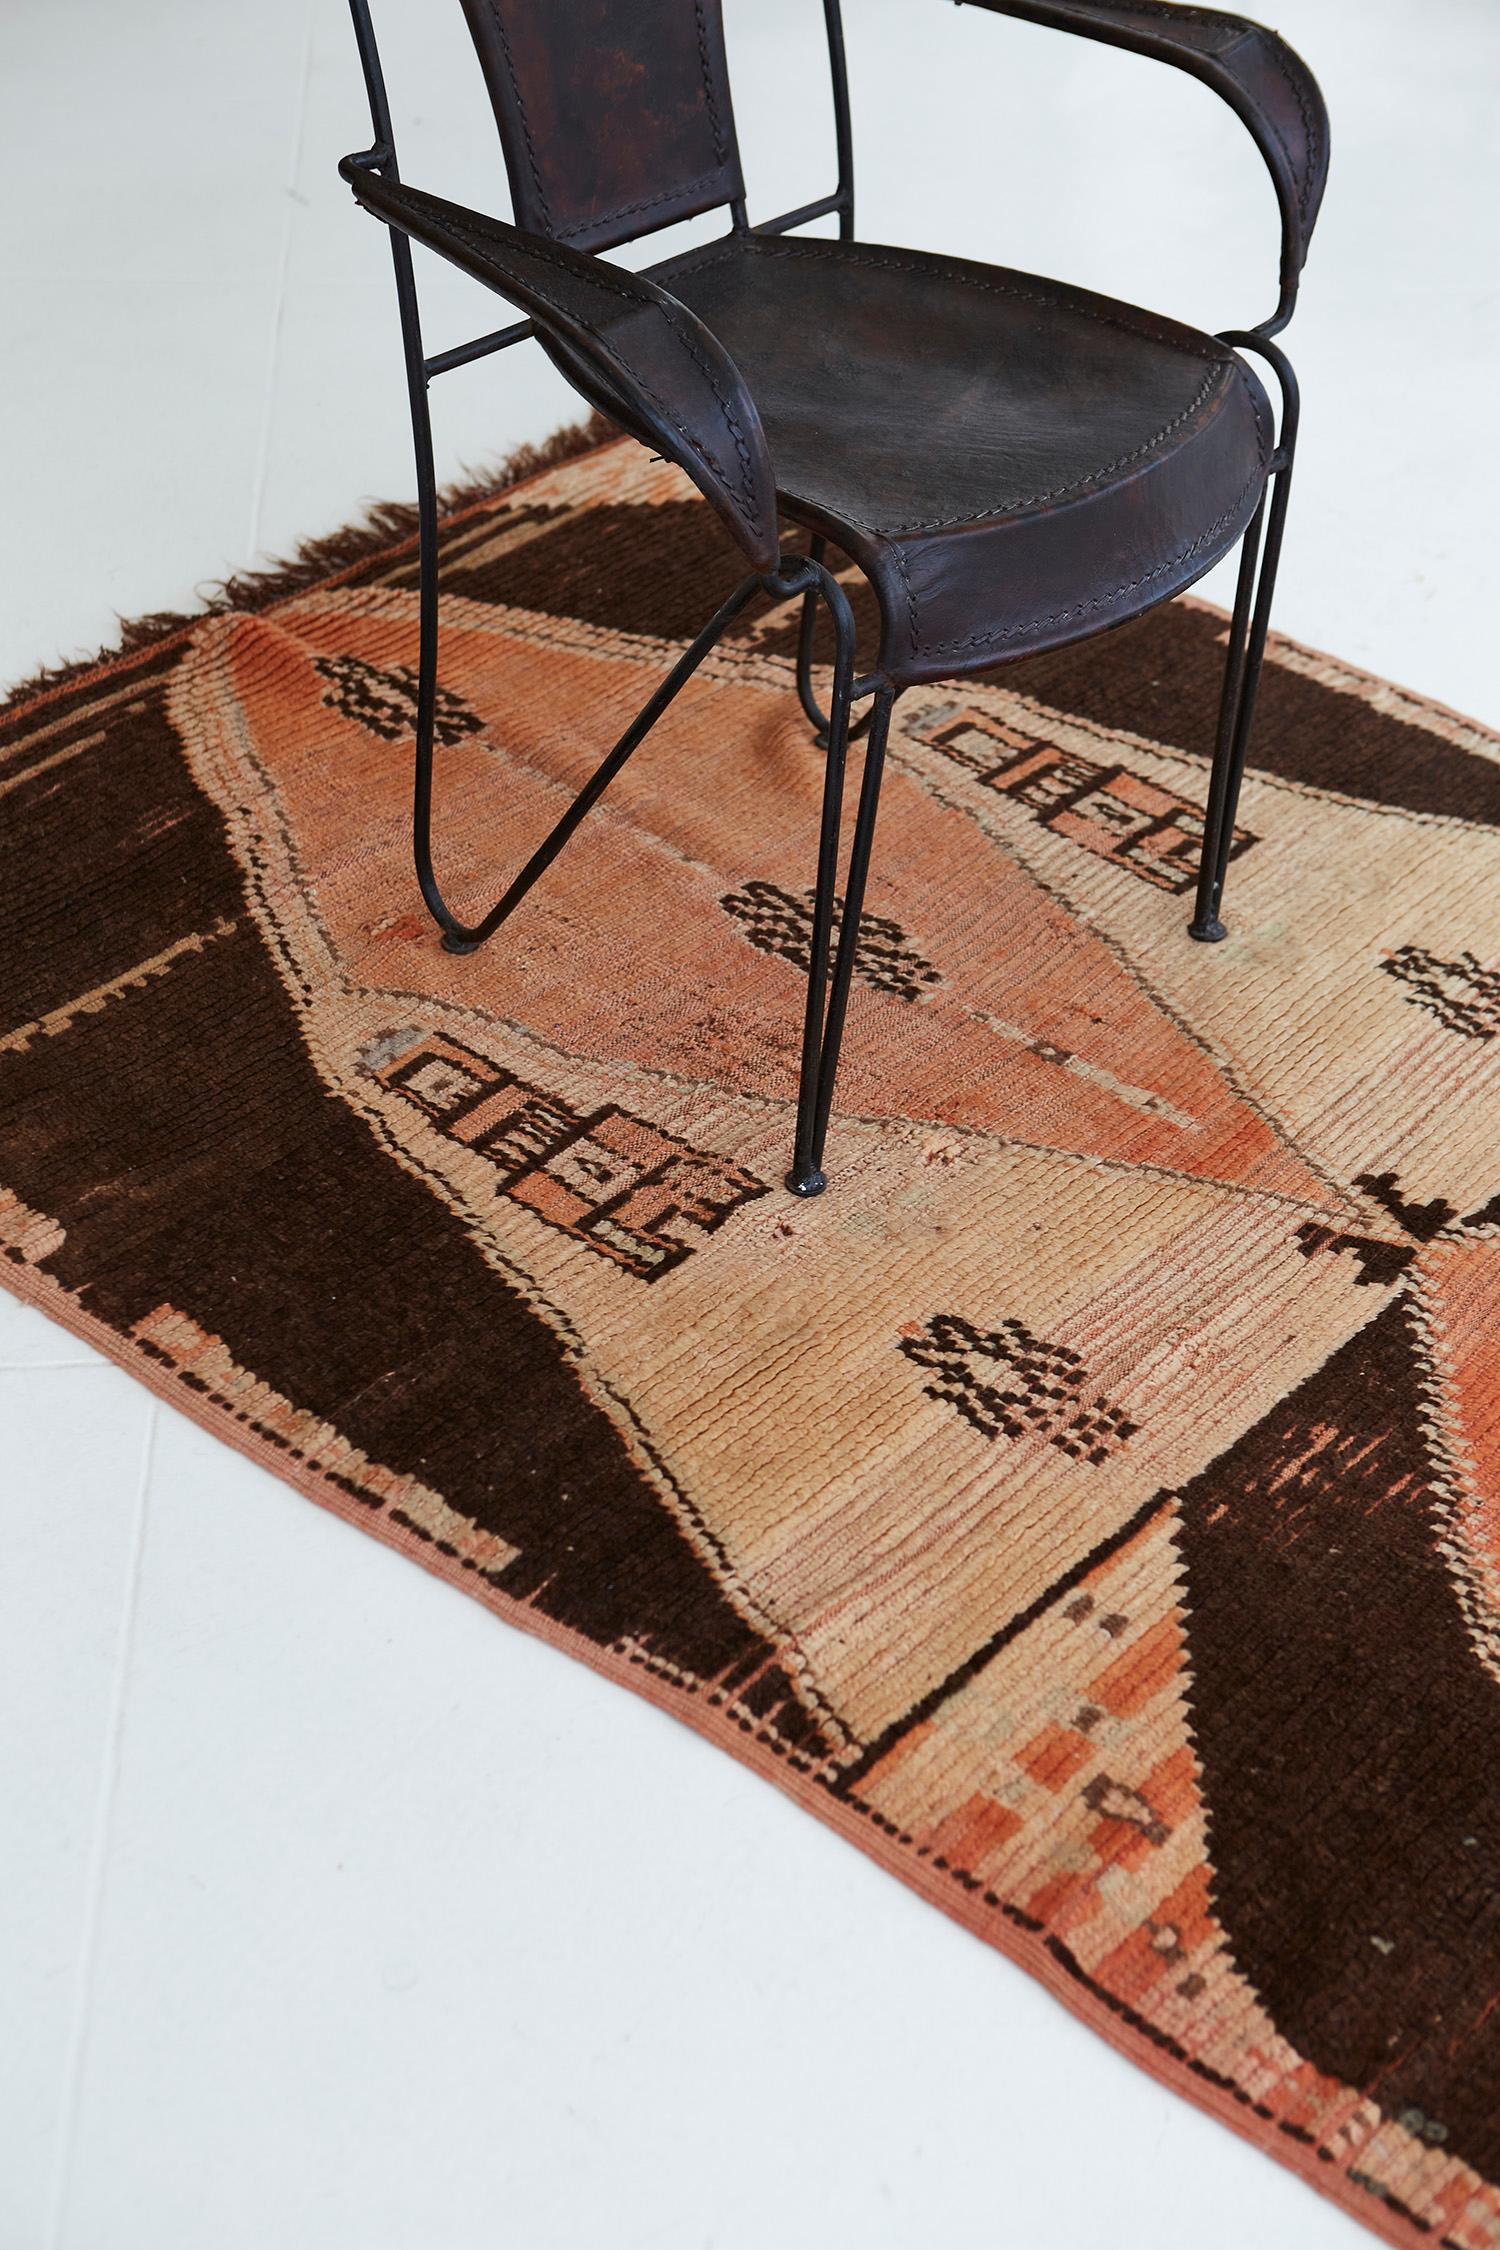 A boldly ornamented vintage Moroccan Azilal Tribe Berber rug with marigold accents in an abrashed textured field. Displaying the rug’s prayer rug formation, which signifies beauty in the Moroccan tradition, this majestic rug gives a sense of